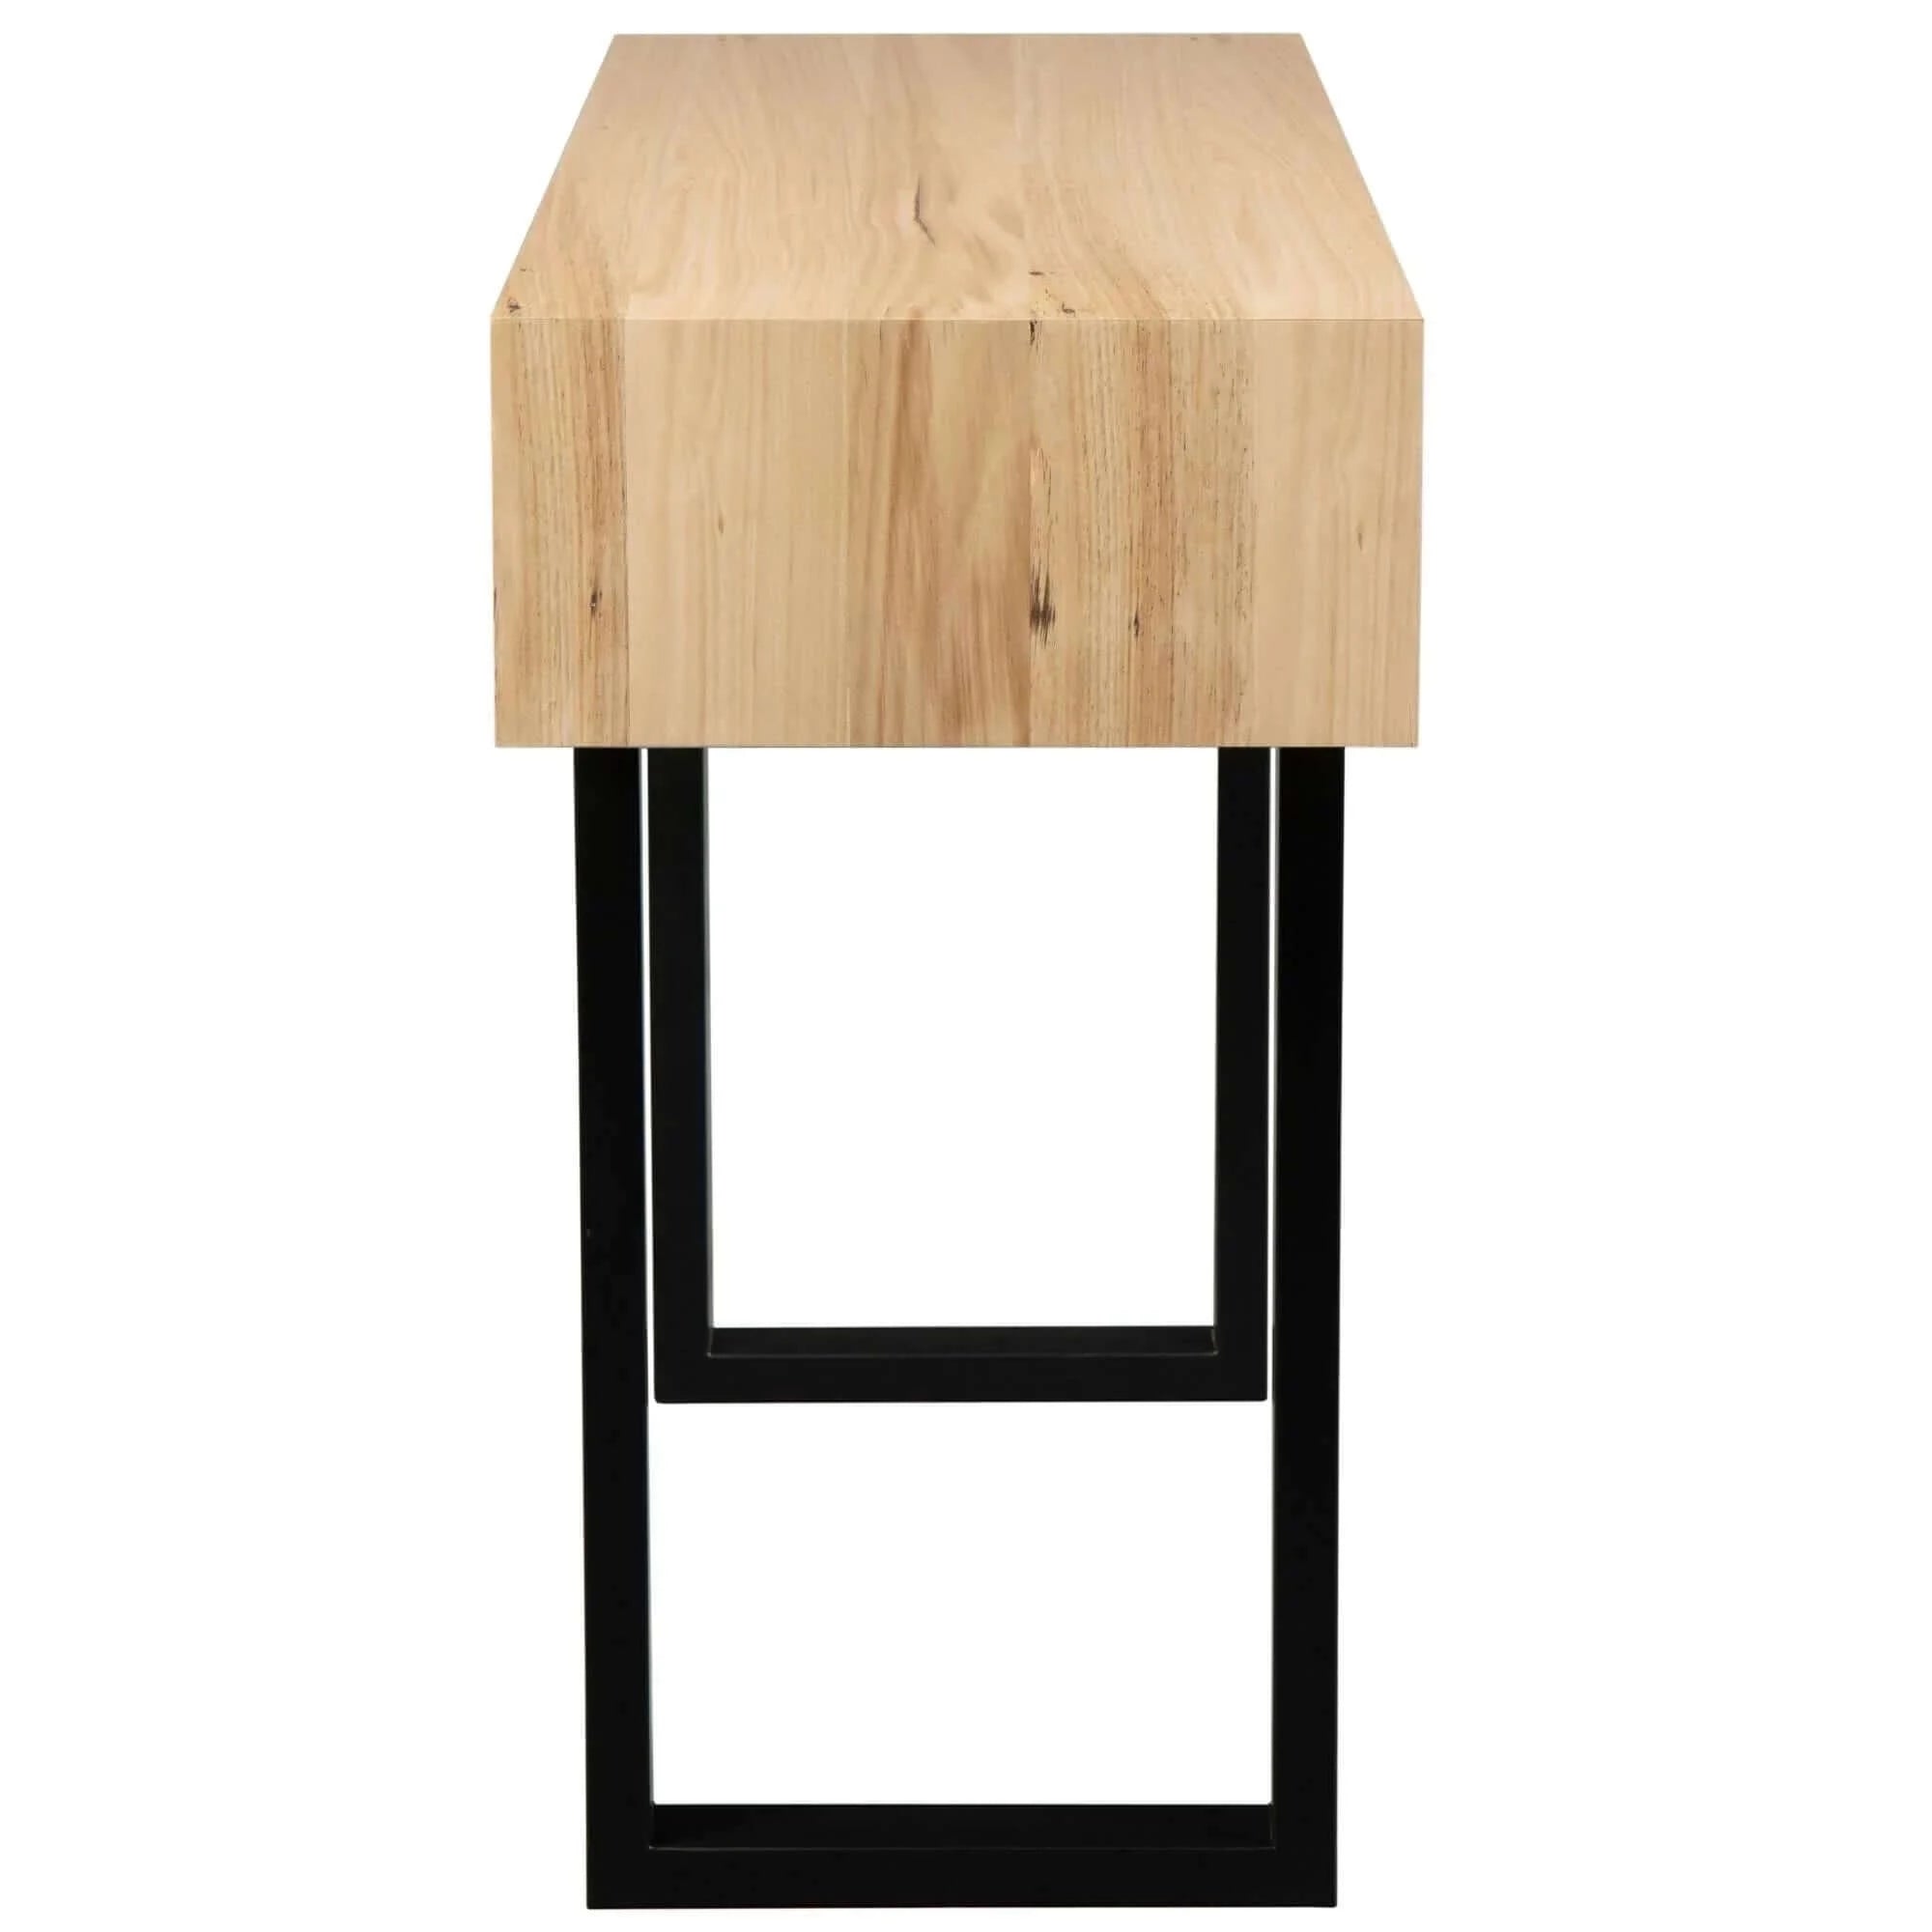 Buy aconite console hallway entry table 120cm solid messmate timber wood - natural - upinteriors-Upinteriors